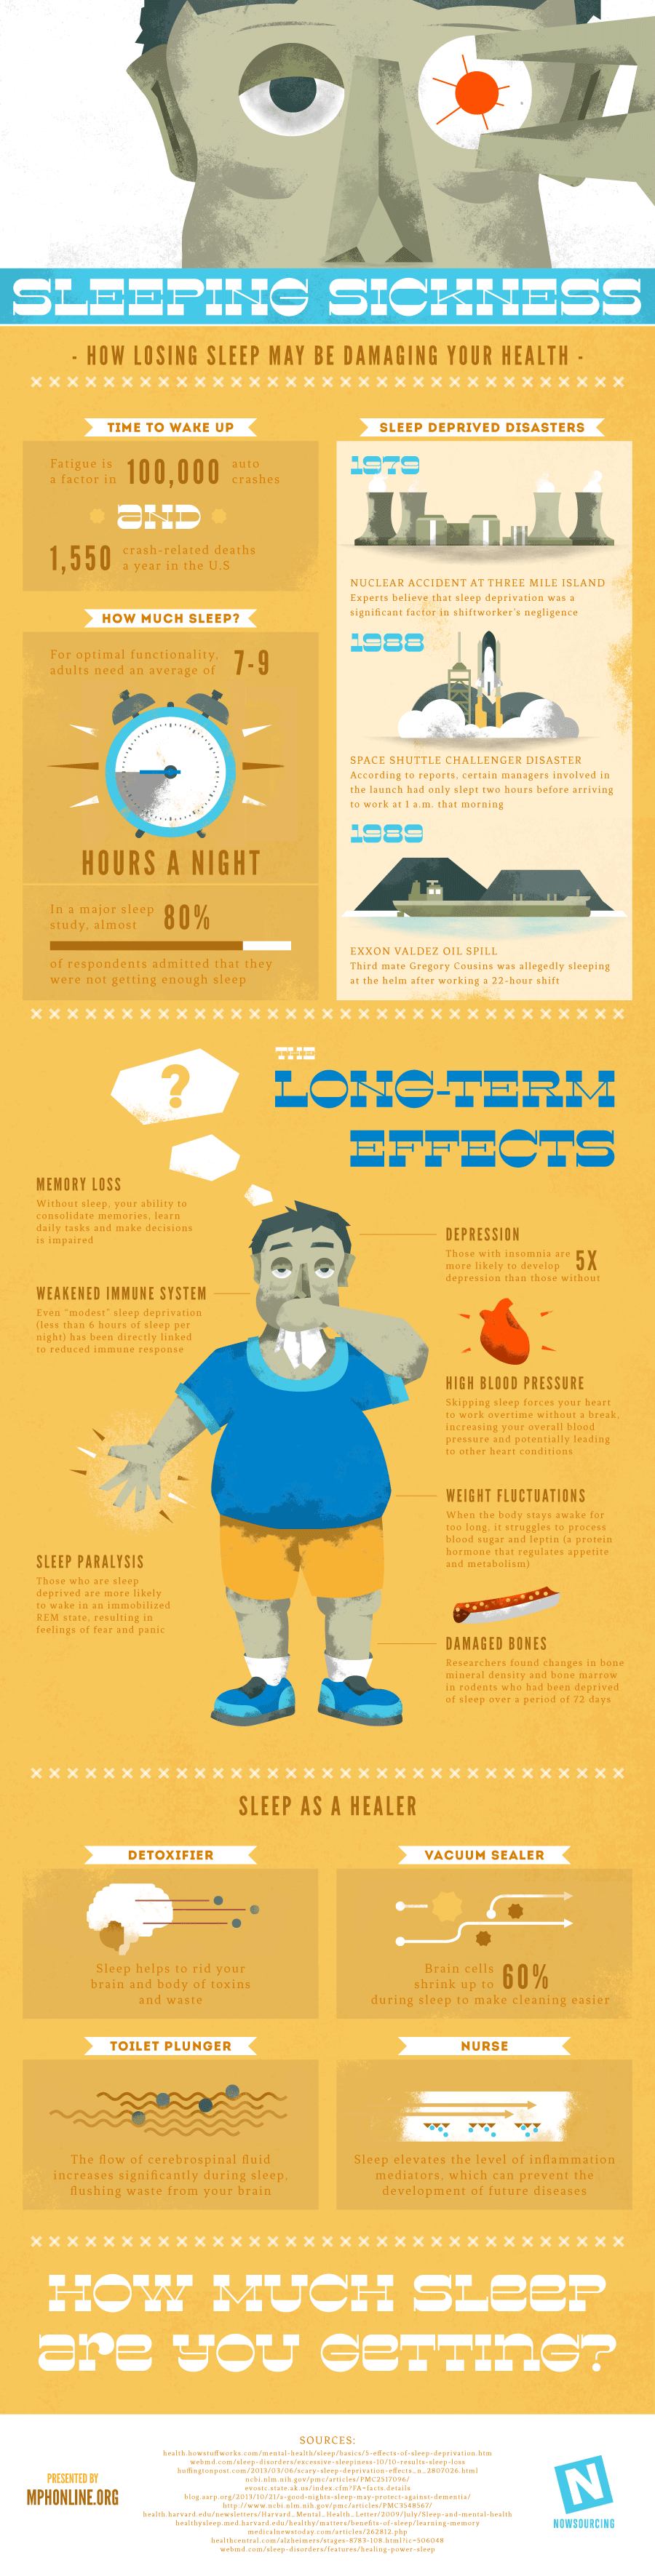 Is Sleeping Sickness Damaging Your Health? Infographic